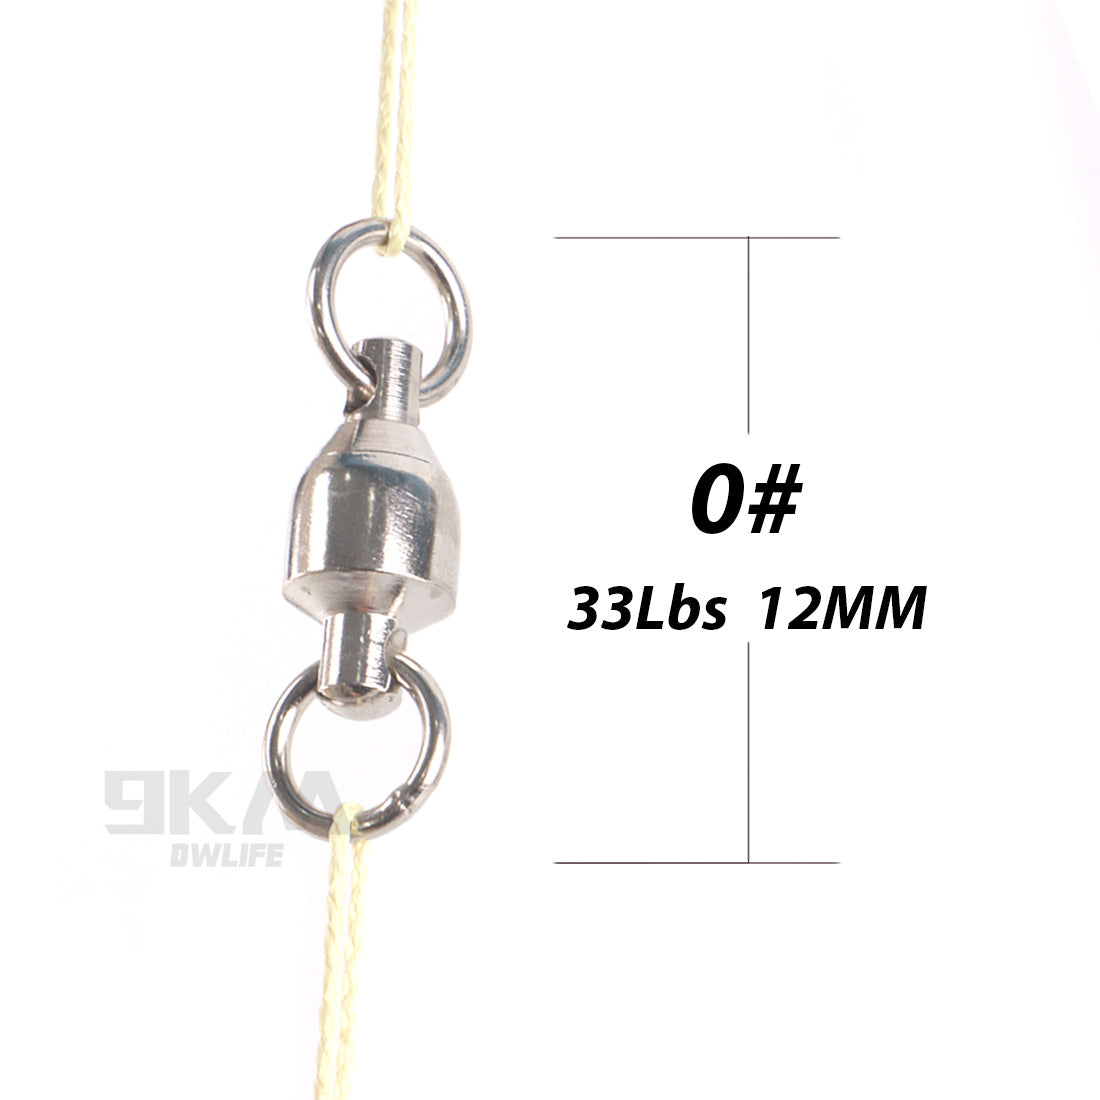 20pc/50pc Solid Ball Bearing Swivels Connector - 10 Sizes